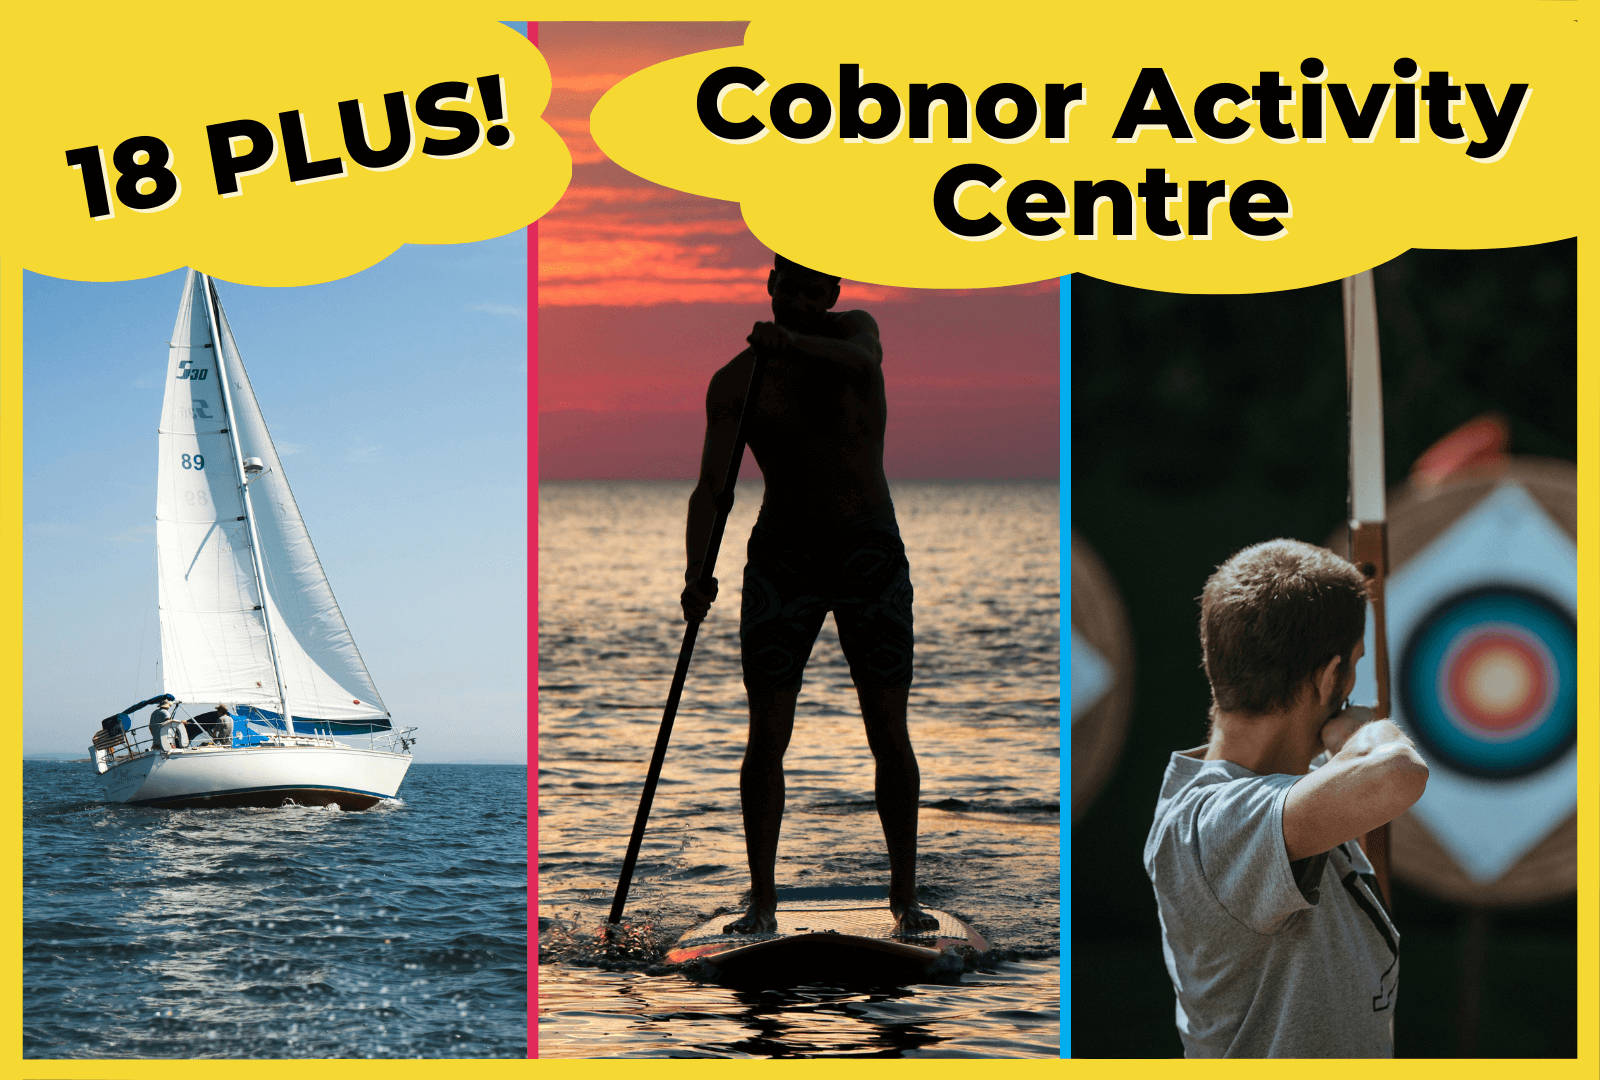 Images of sailing, paddleboarding and archery with the text '18 PLUS' and 'Cobnor Activity Centre' overlaid.